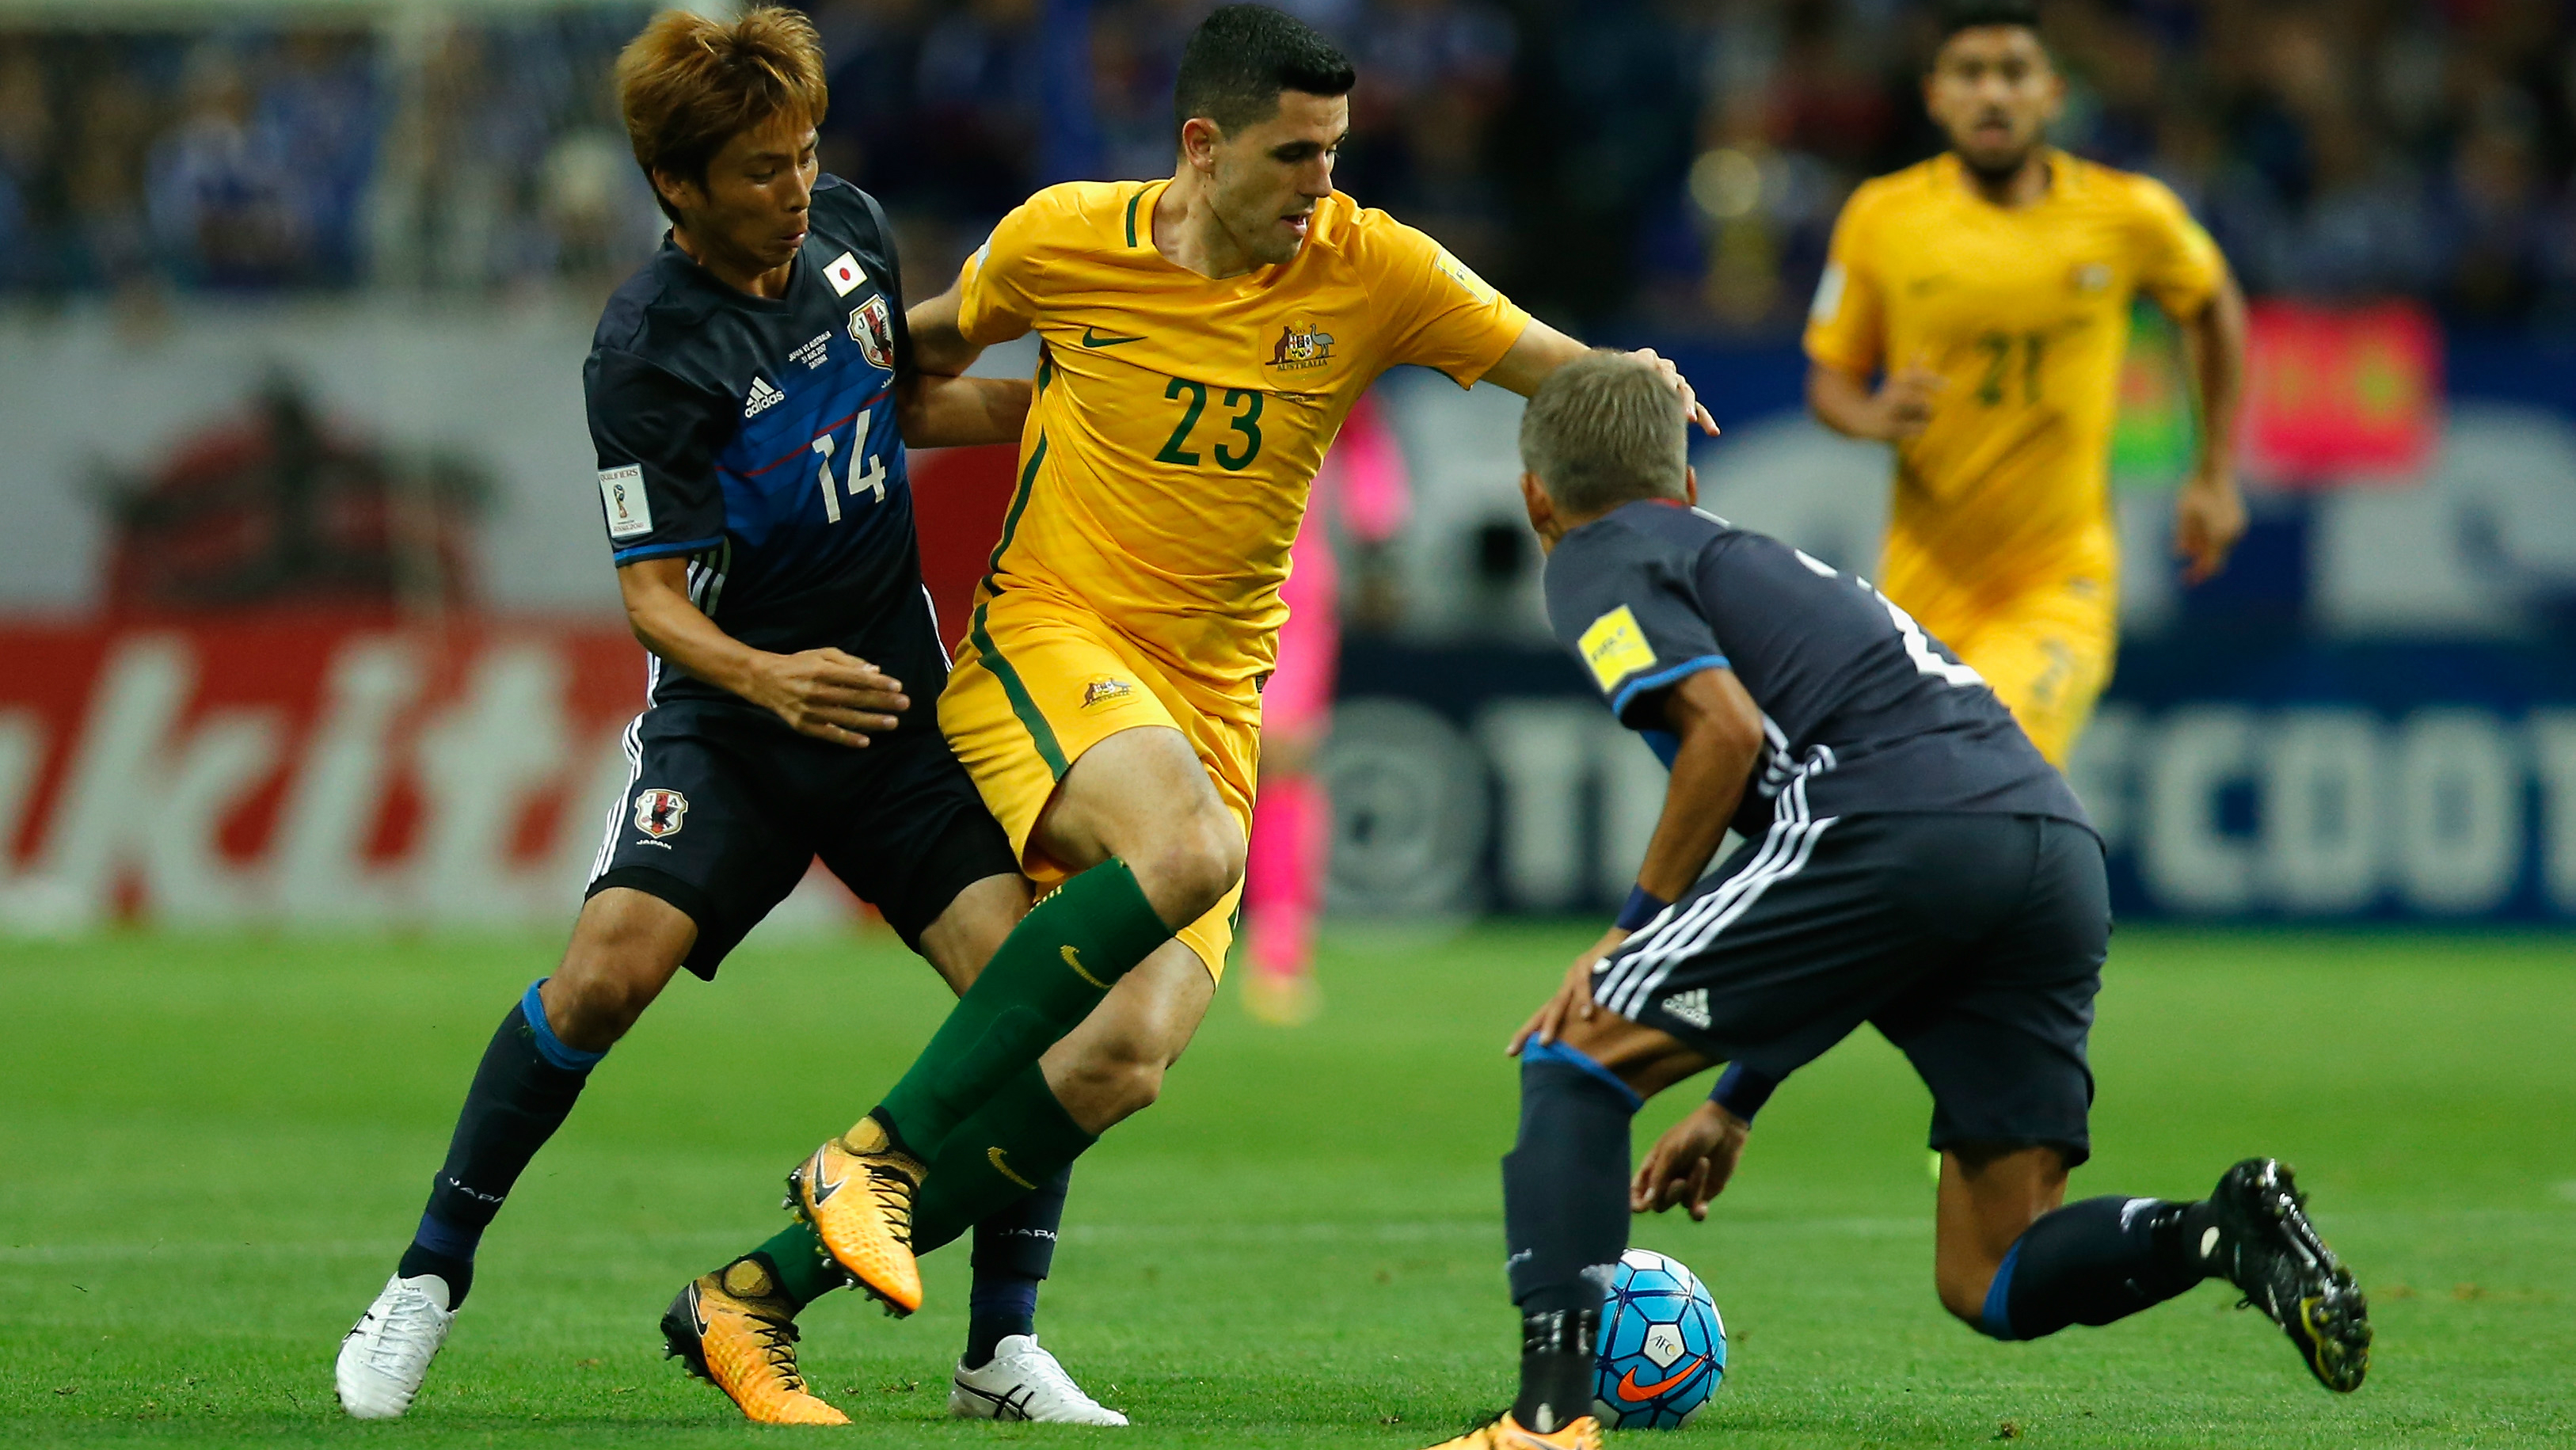 Caltex Socceroos playmaker Tom Rogic looks to take on a couple of Japanese defenders.